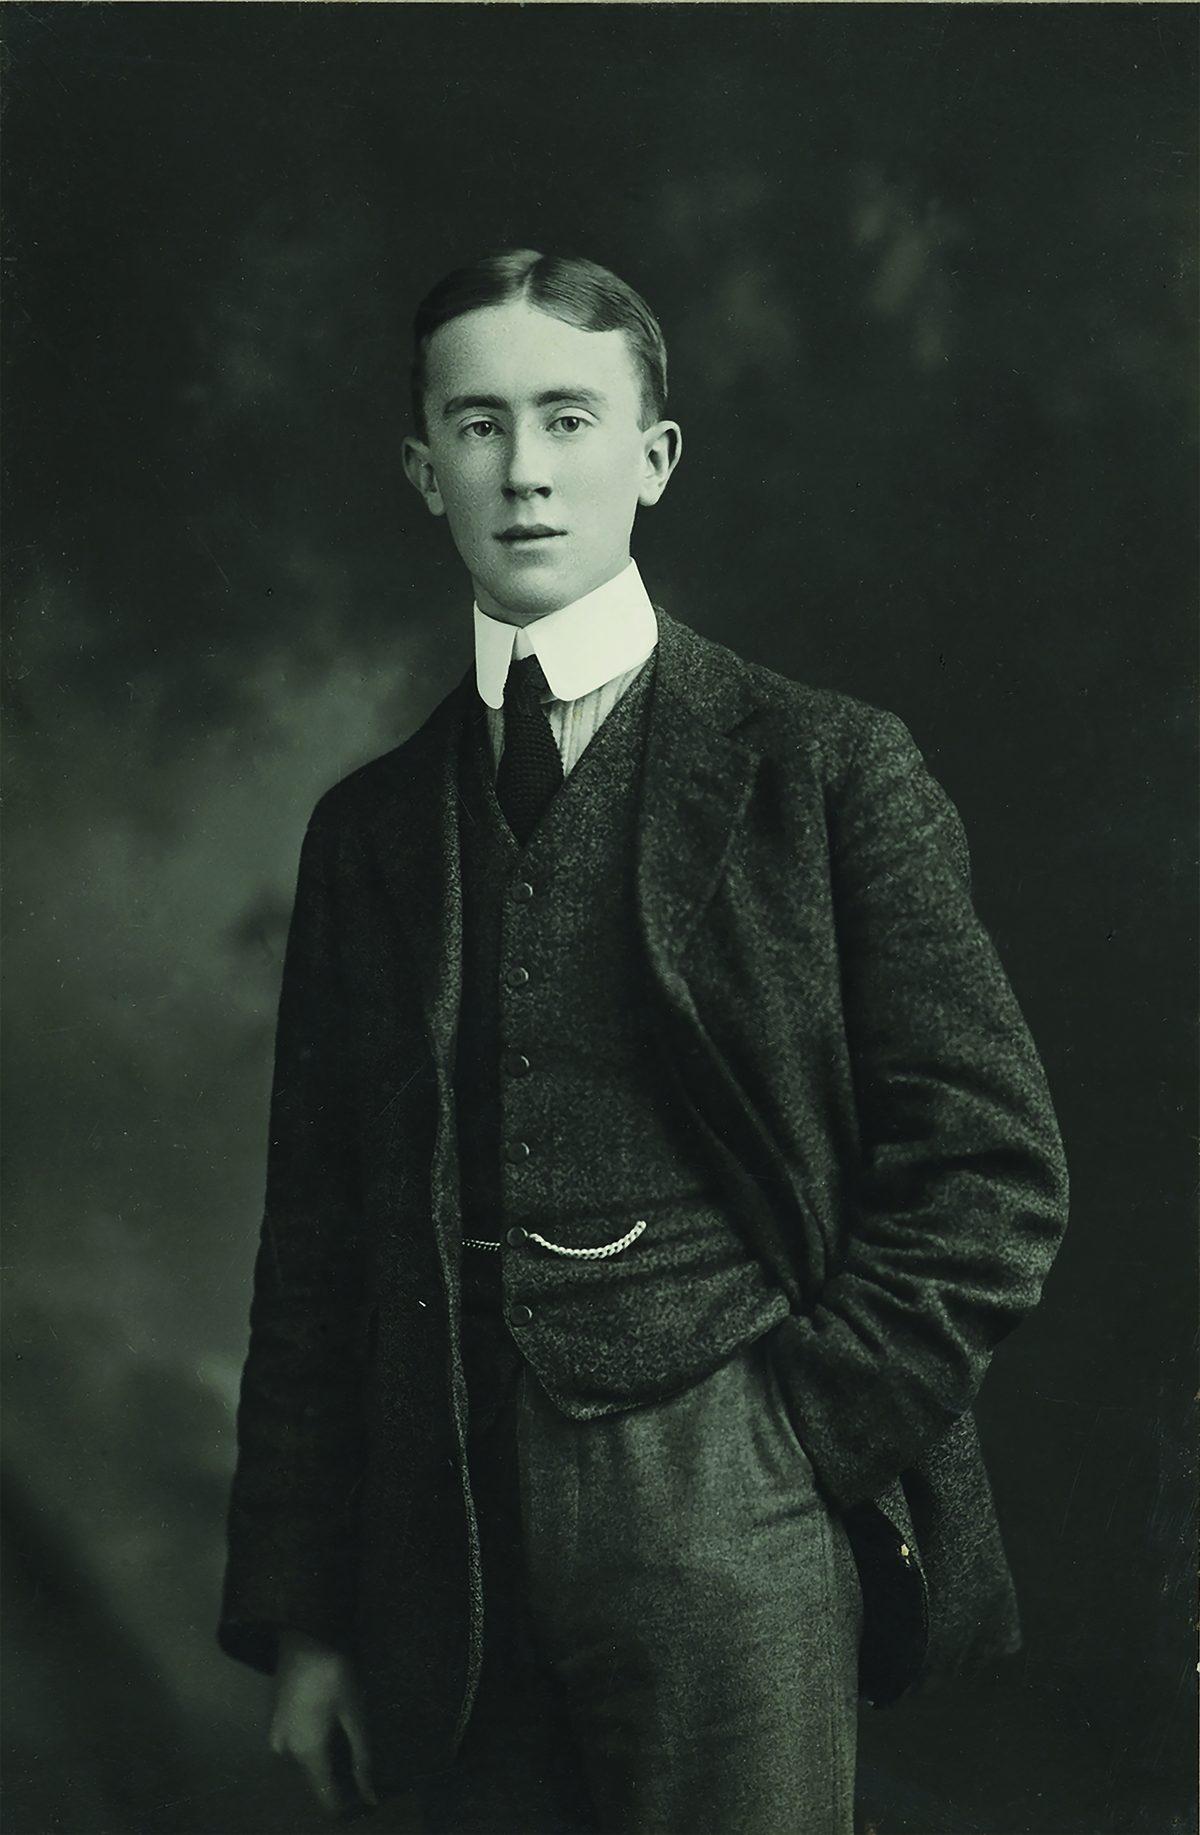 J.R.R. Tolkien, January 1911 by the Studio of H.J. Whitlock & Sons Ltd., Birmingham. Black and white photograph. Bodleian Libraries. (The Tolkien Trust 1977)